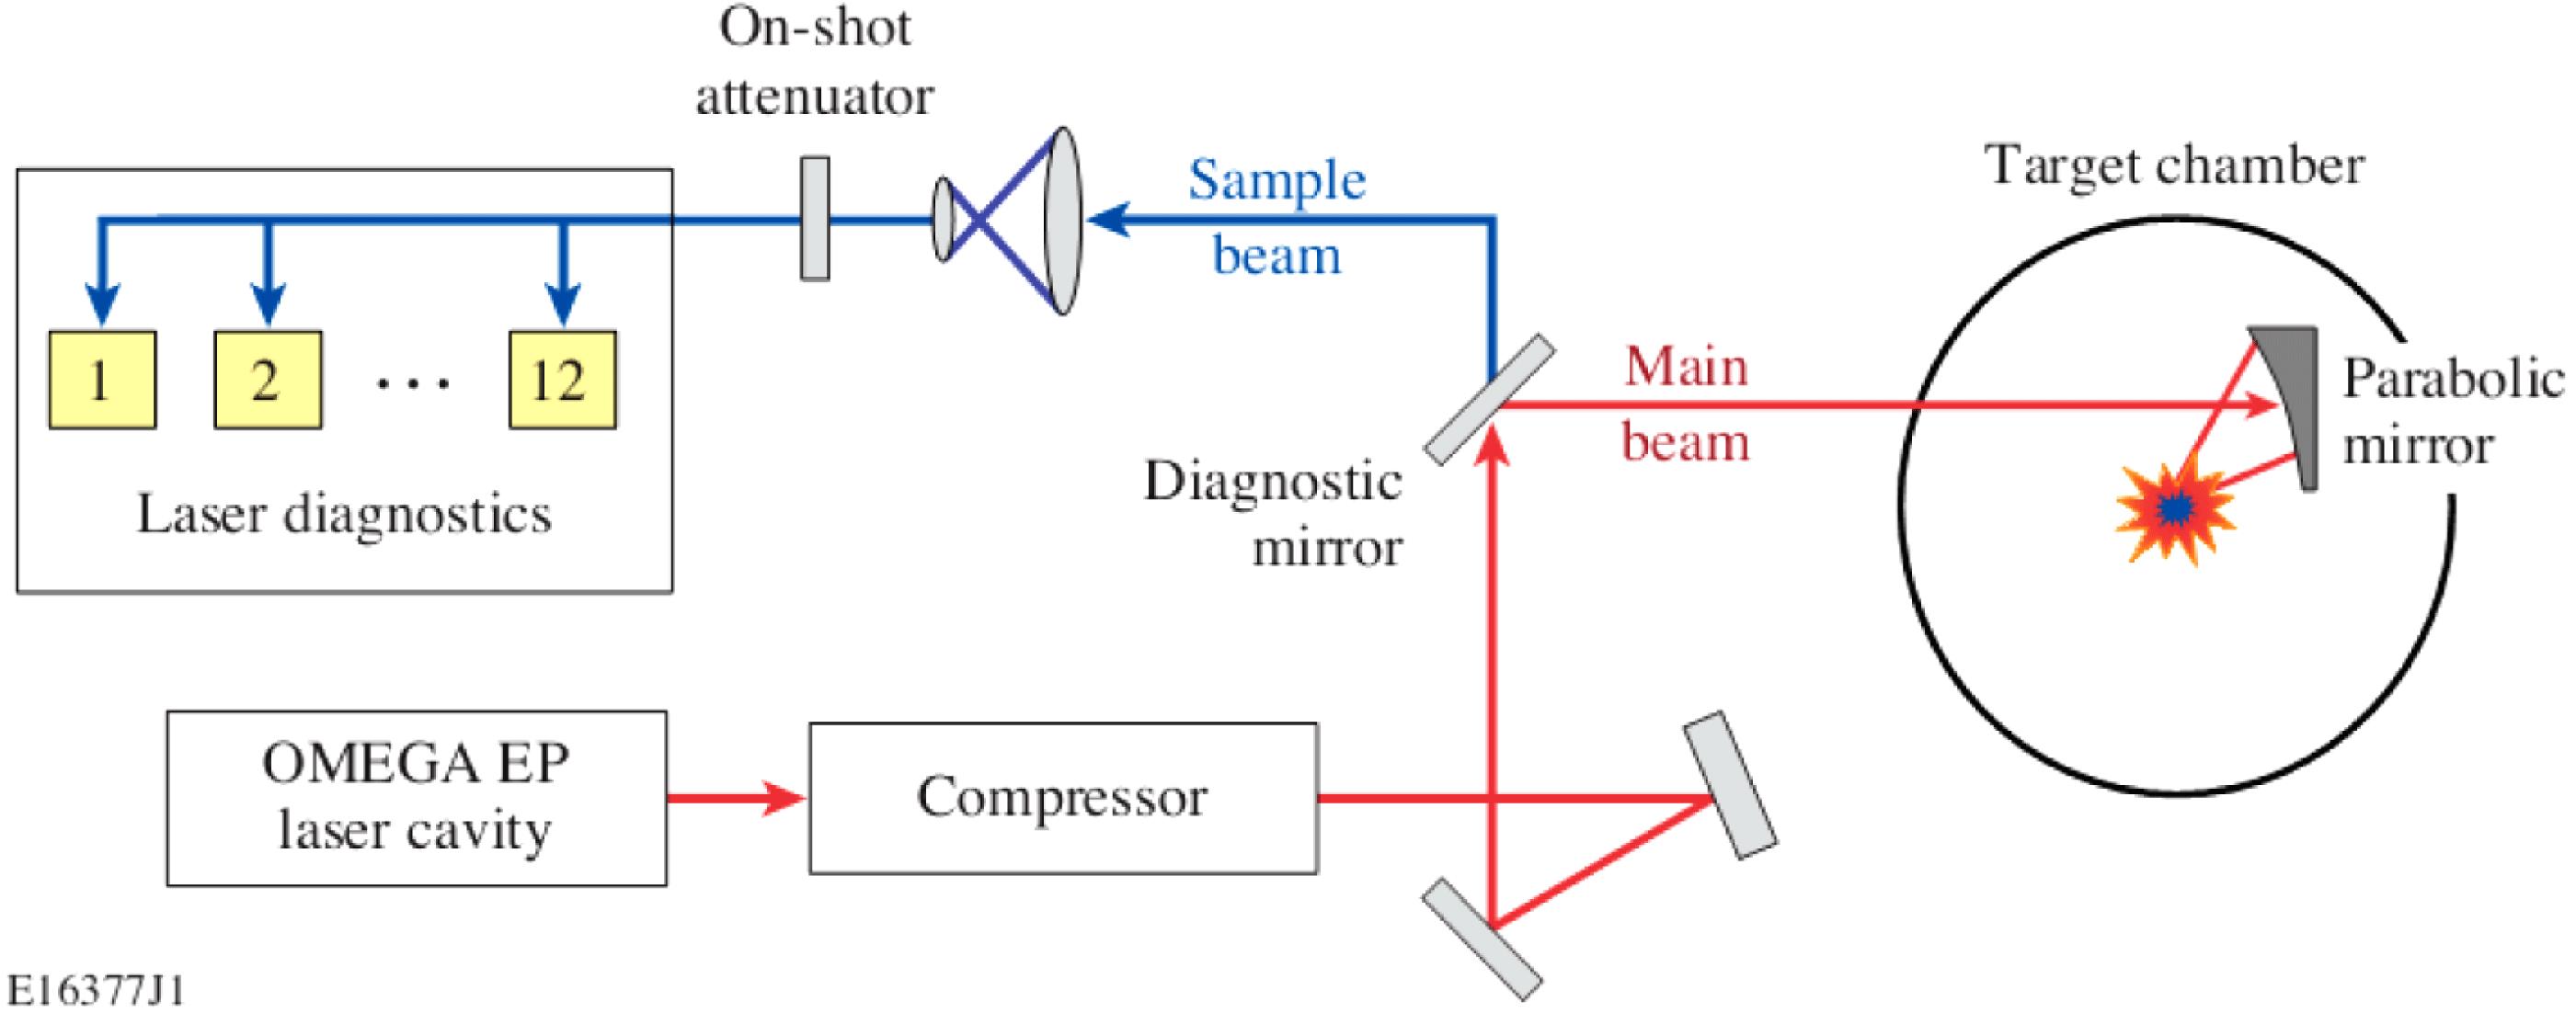 Overview of an OMEGA EP, showing the relative location of the main laser beam and the sample beam used by diagnostics for on-shot measurement of the laser properties. The FSD wavefront sensor is one of many laser diagnostics that characterize the sample beam (from Ref. [10]).